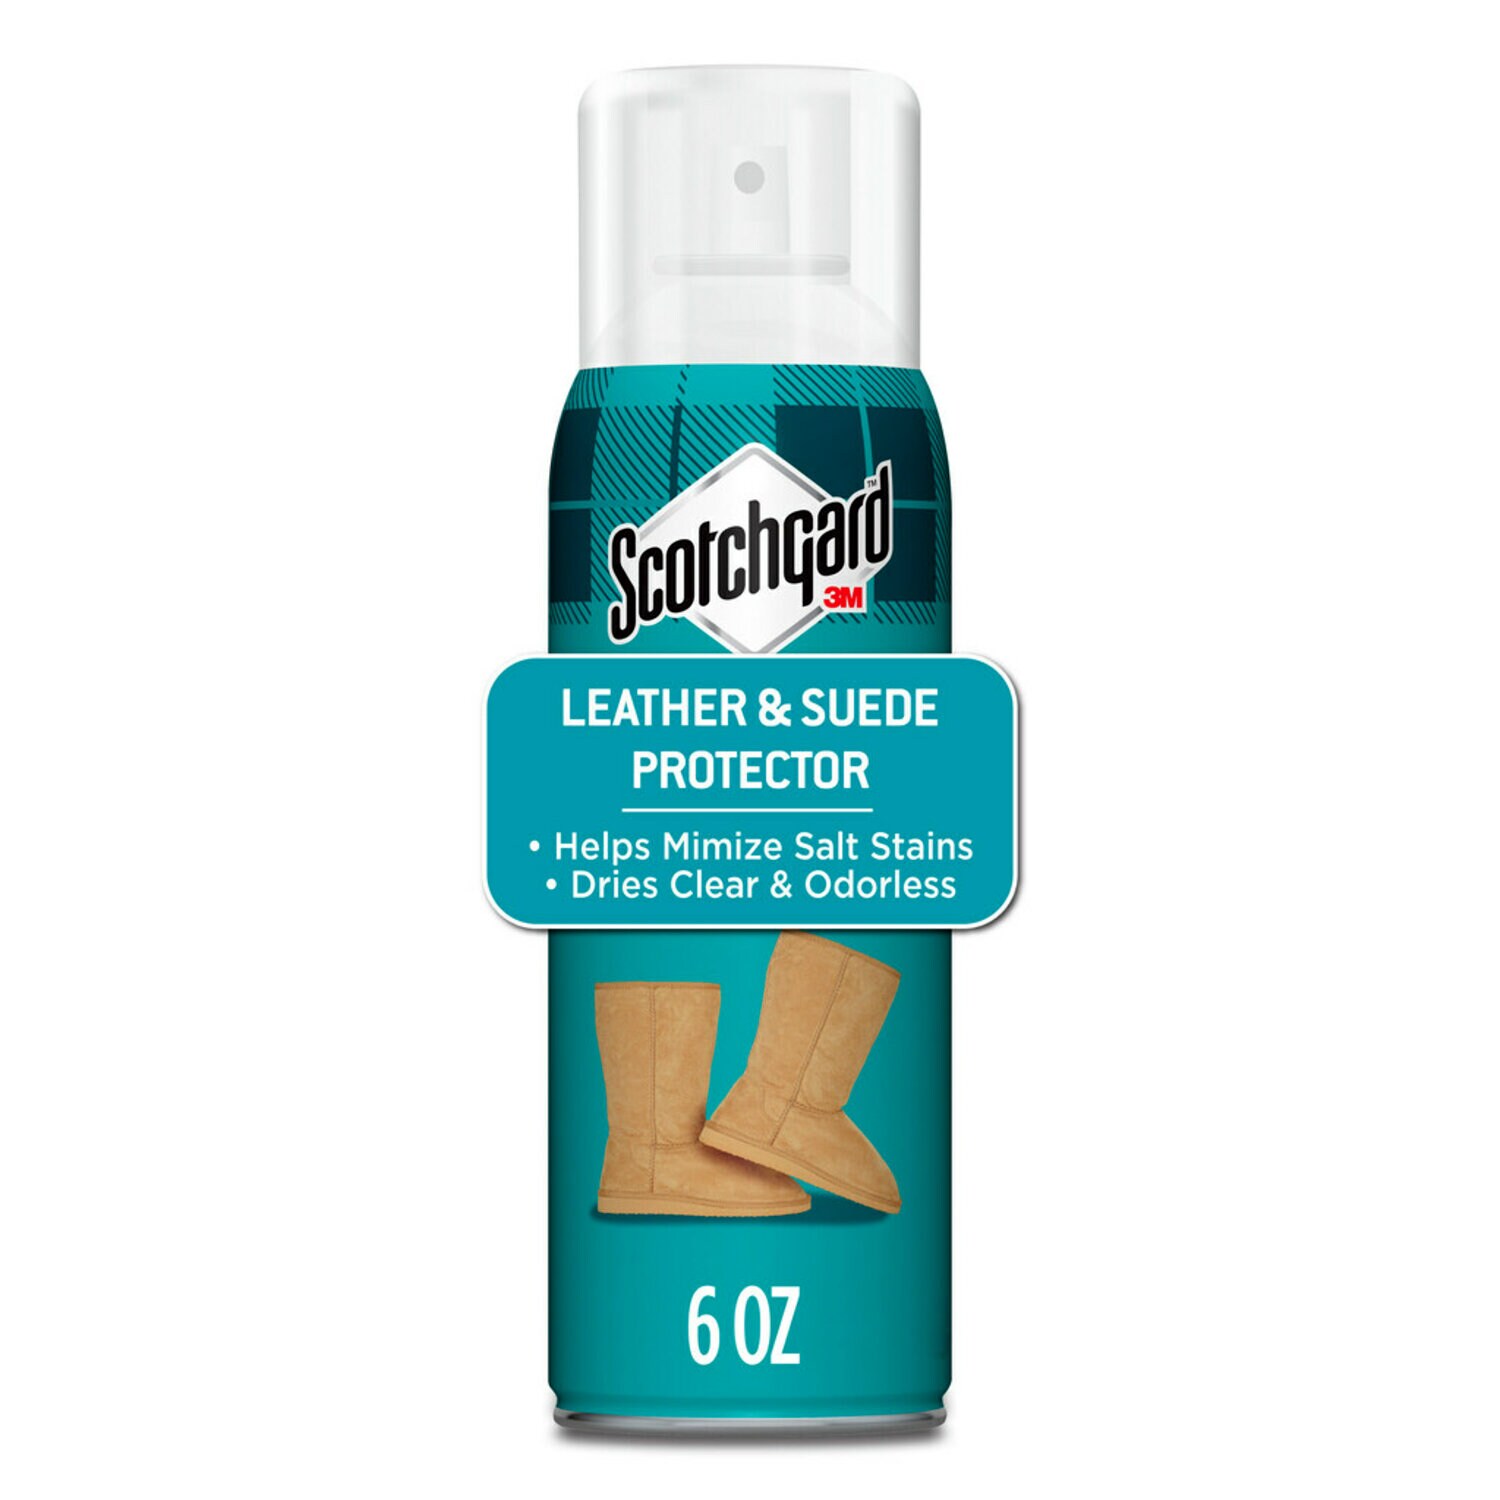 7100252762 - Scotchgard Leather and Suede Protector 4506-G3, 6 oz (170 g)